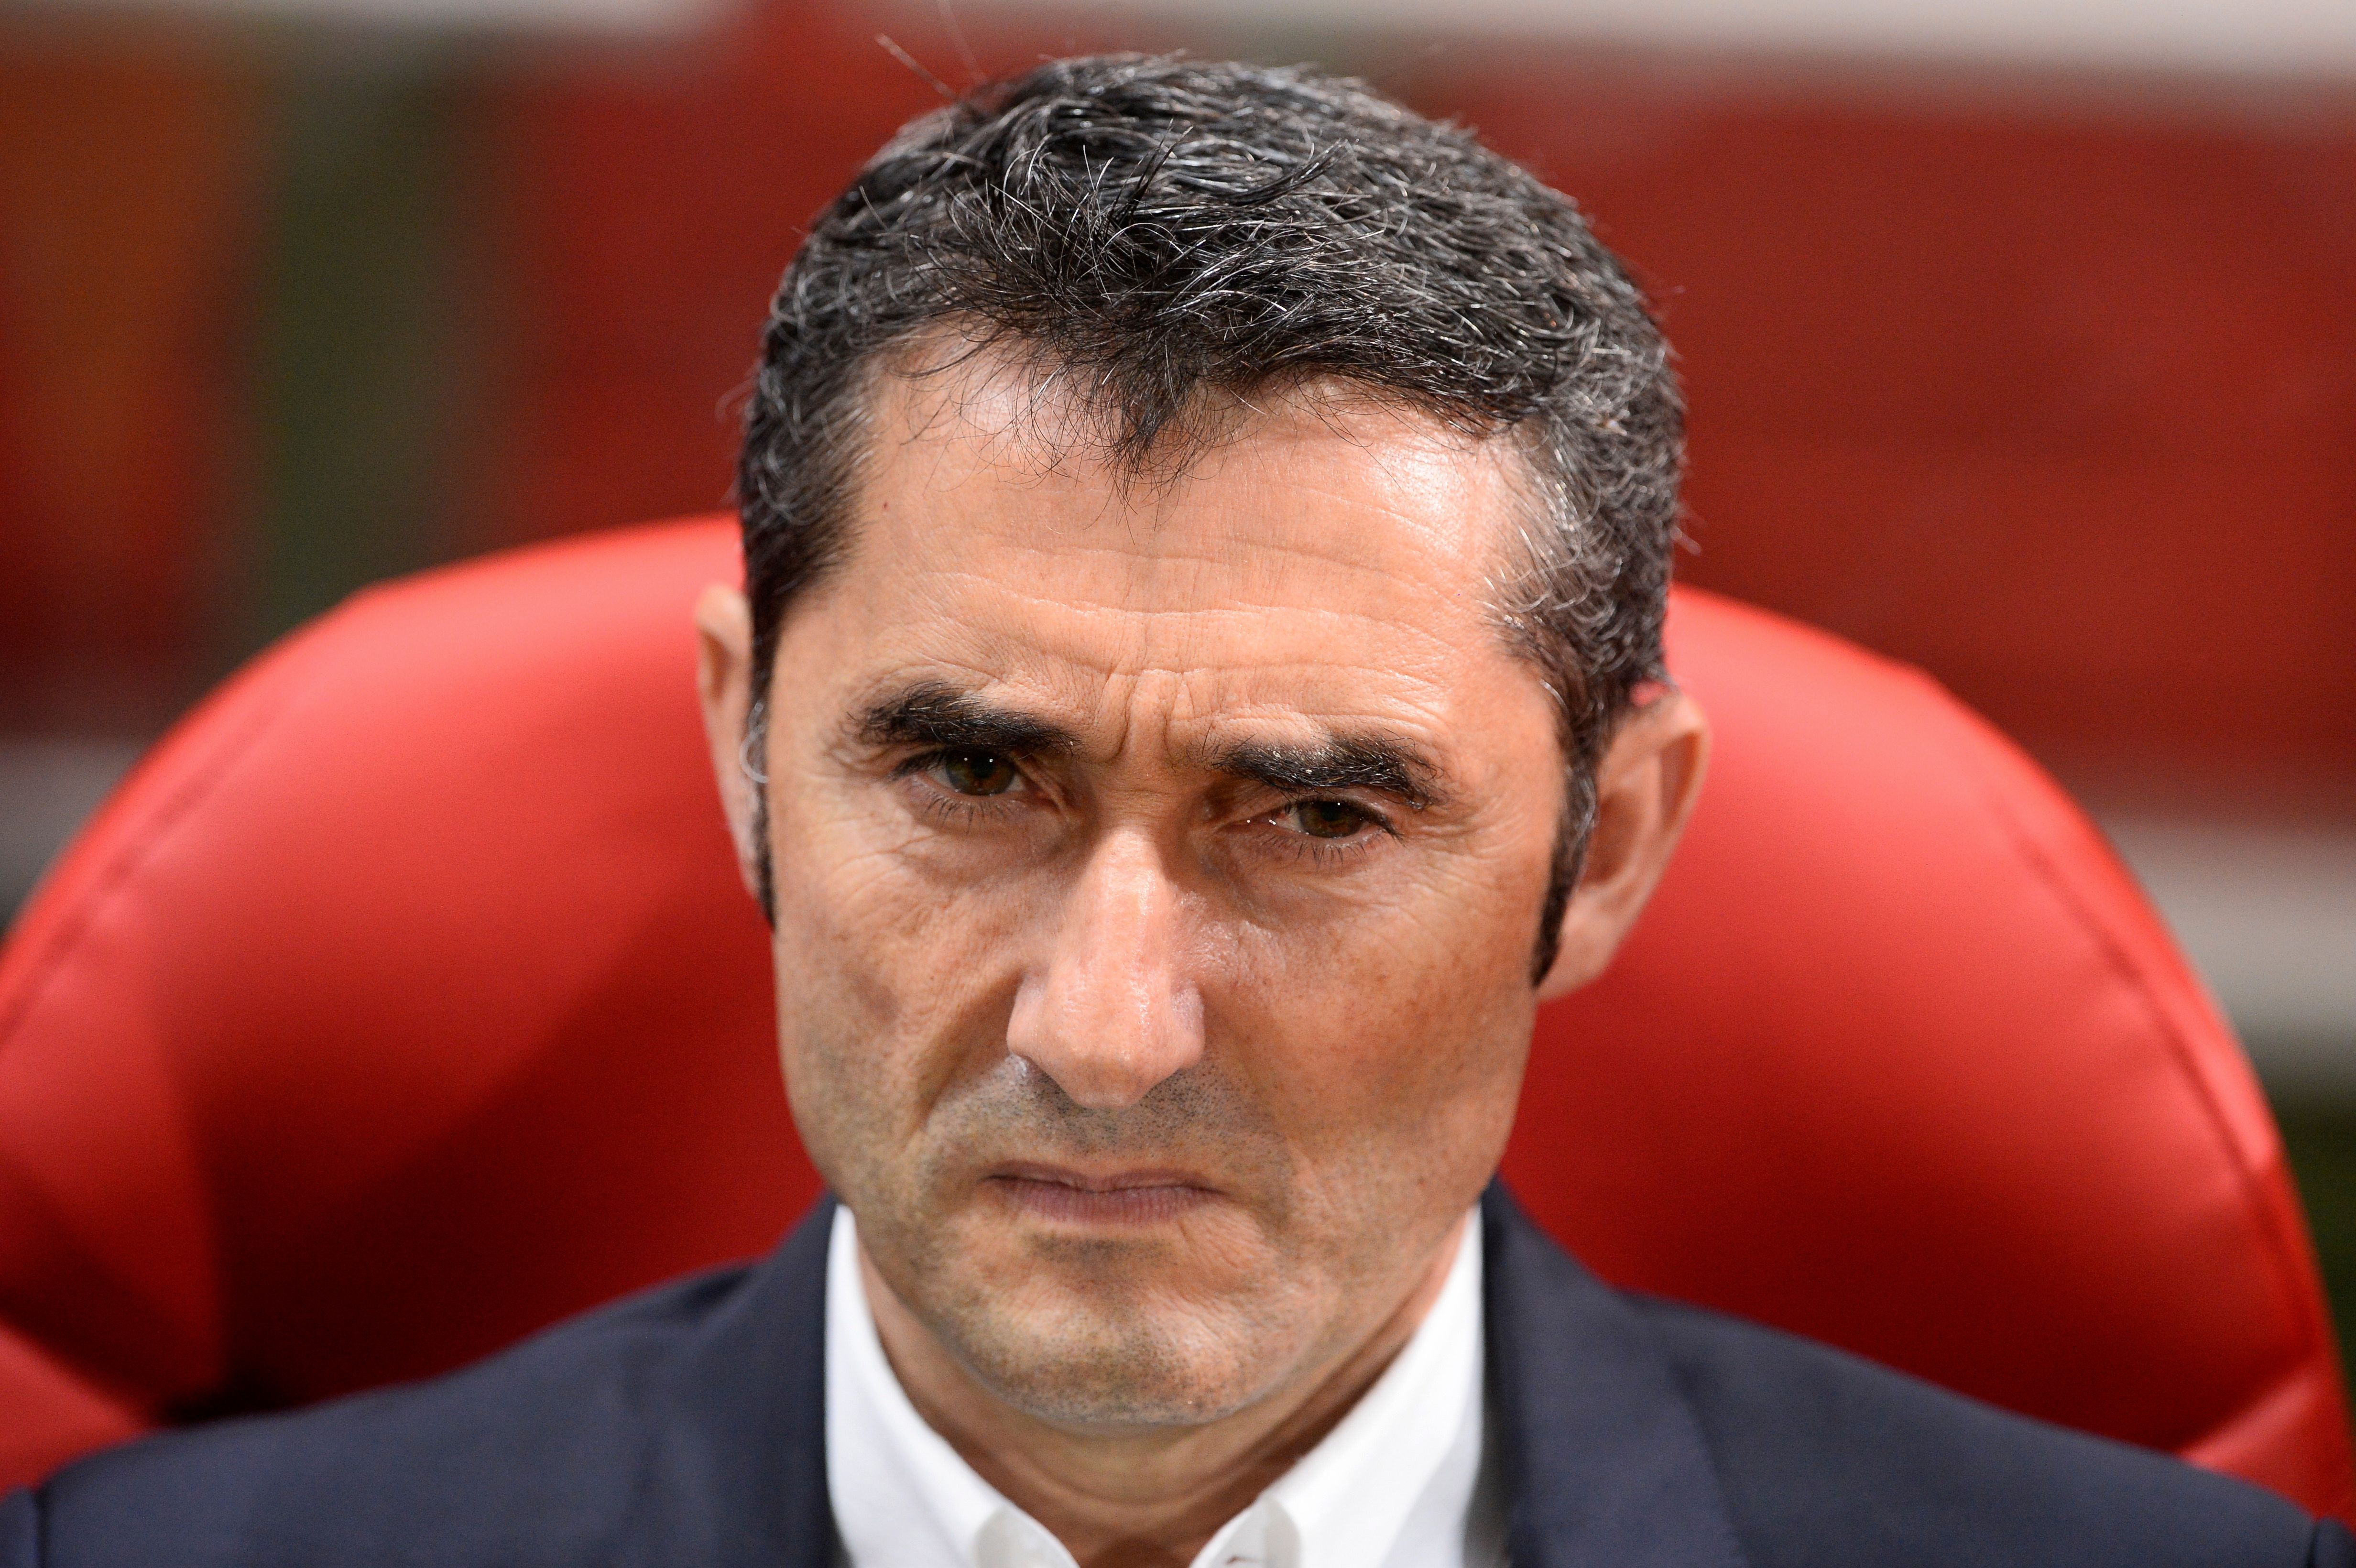 Barcelona's coach from Spain Ernesto Valverde looks on before the Spanish league football match Girona FC vs FC Barcelona at the Montilivi stadium in Girona on September 23, 2017. / AFP PHOTO / Josep LAGO        (Photo credit should read JOSEP LAGO/AFP/Getty Images)